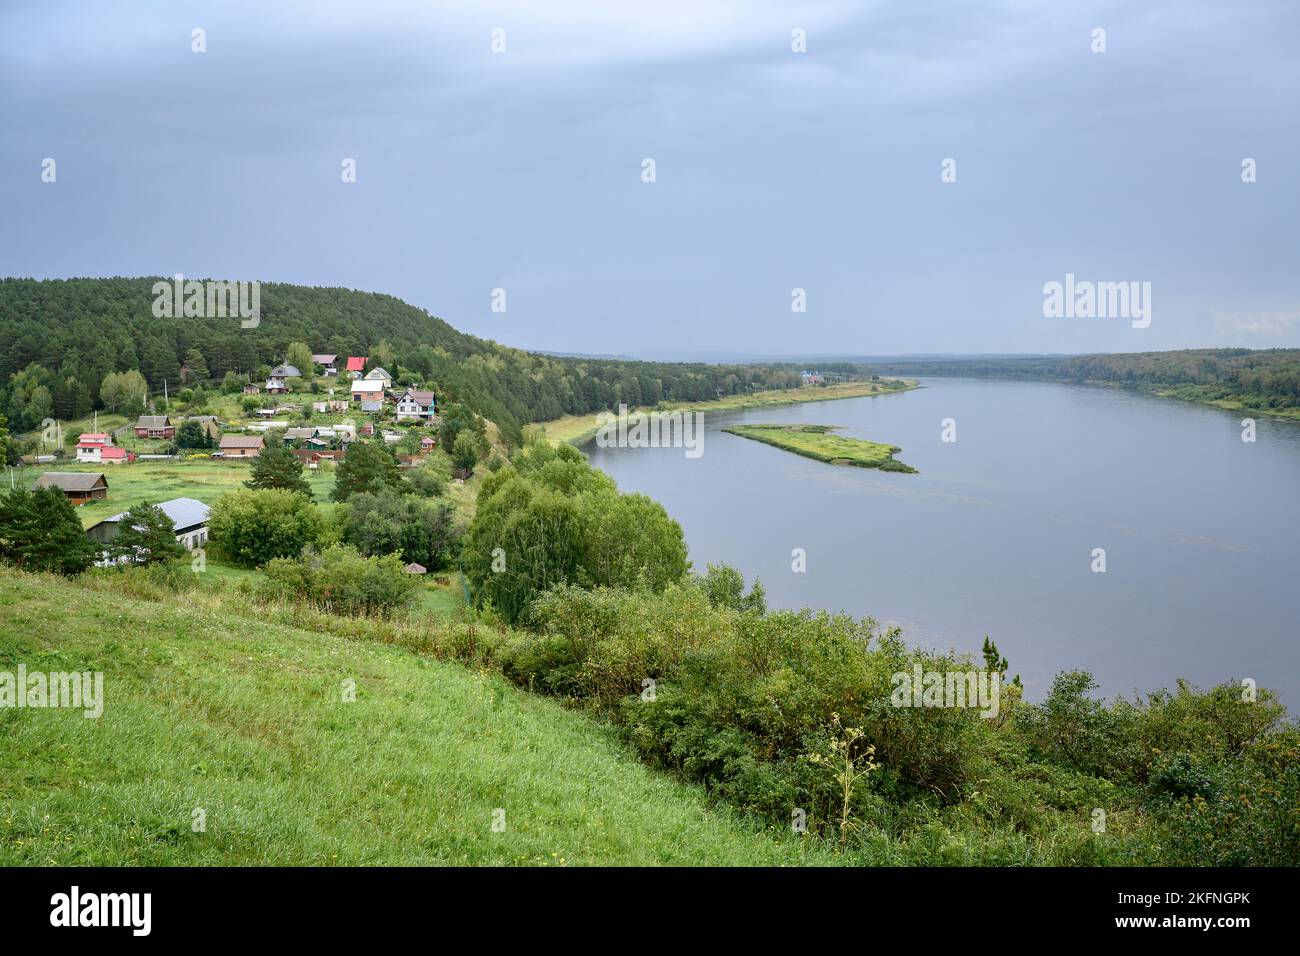 View of the Siberian Tom River with coastal meadows, forests and a village under a rainy sky Stock Photo